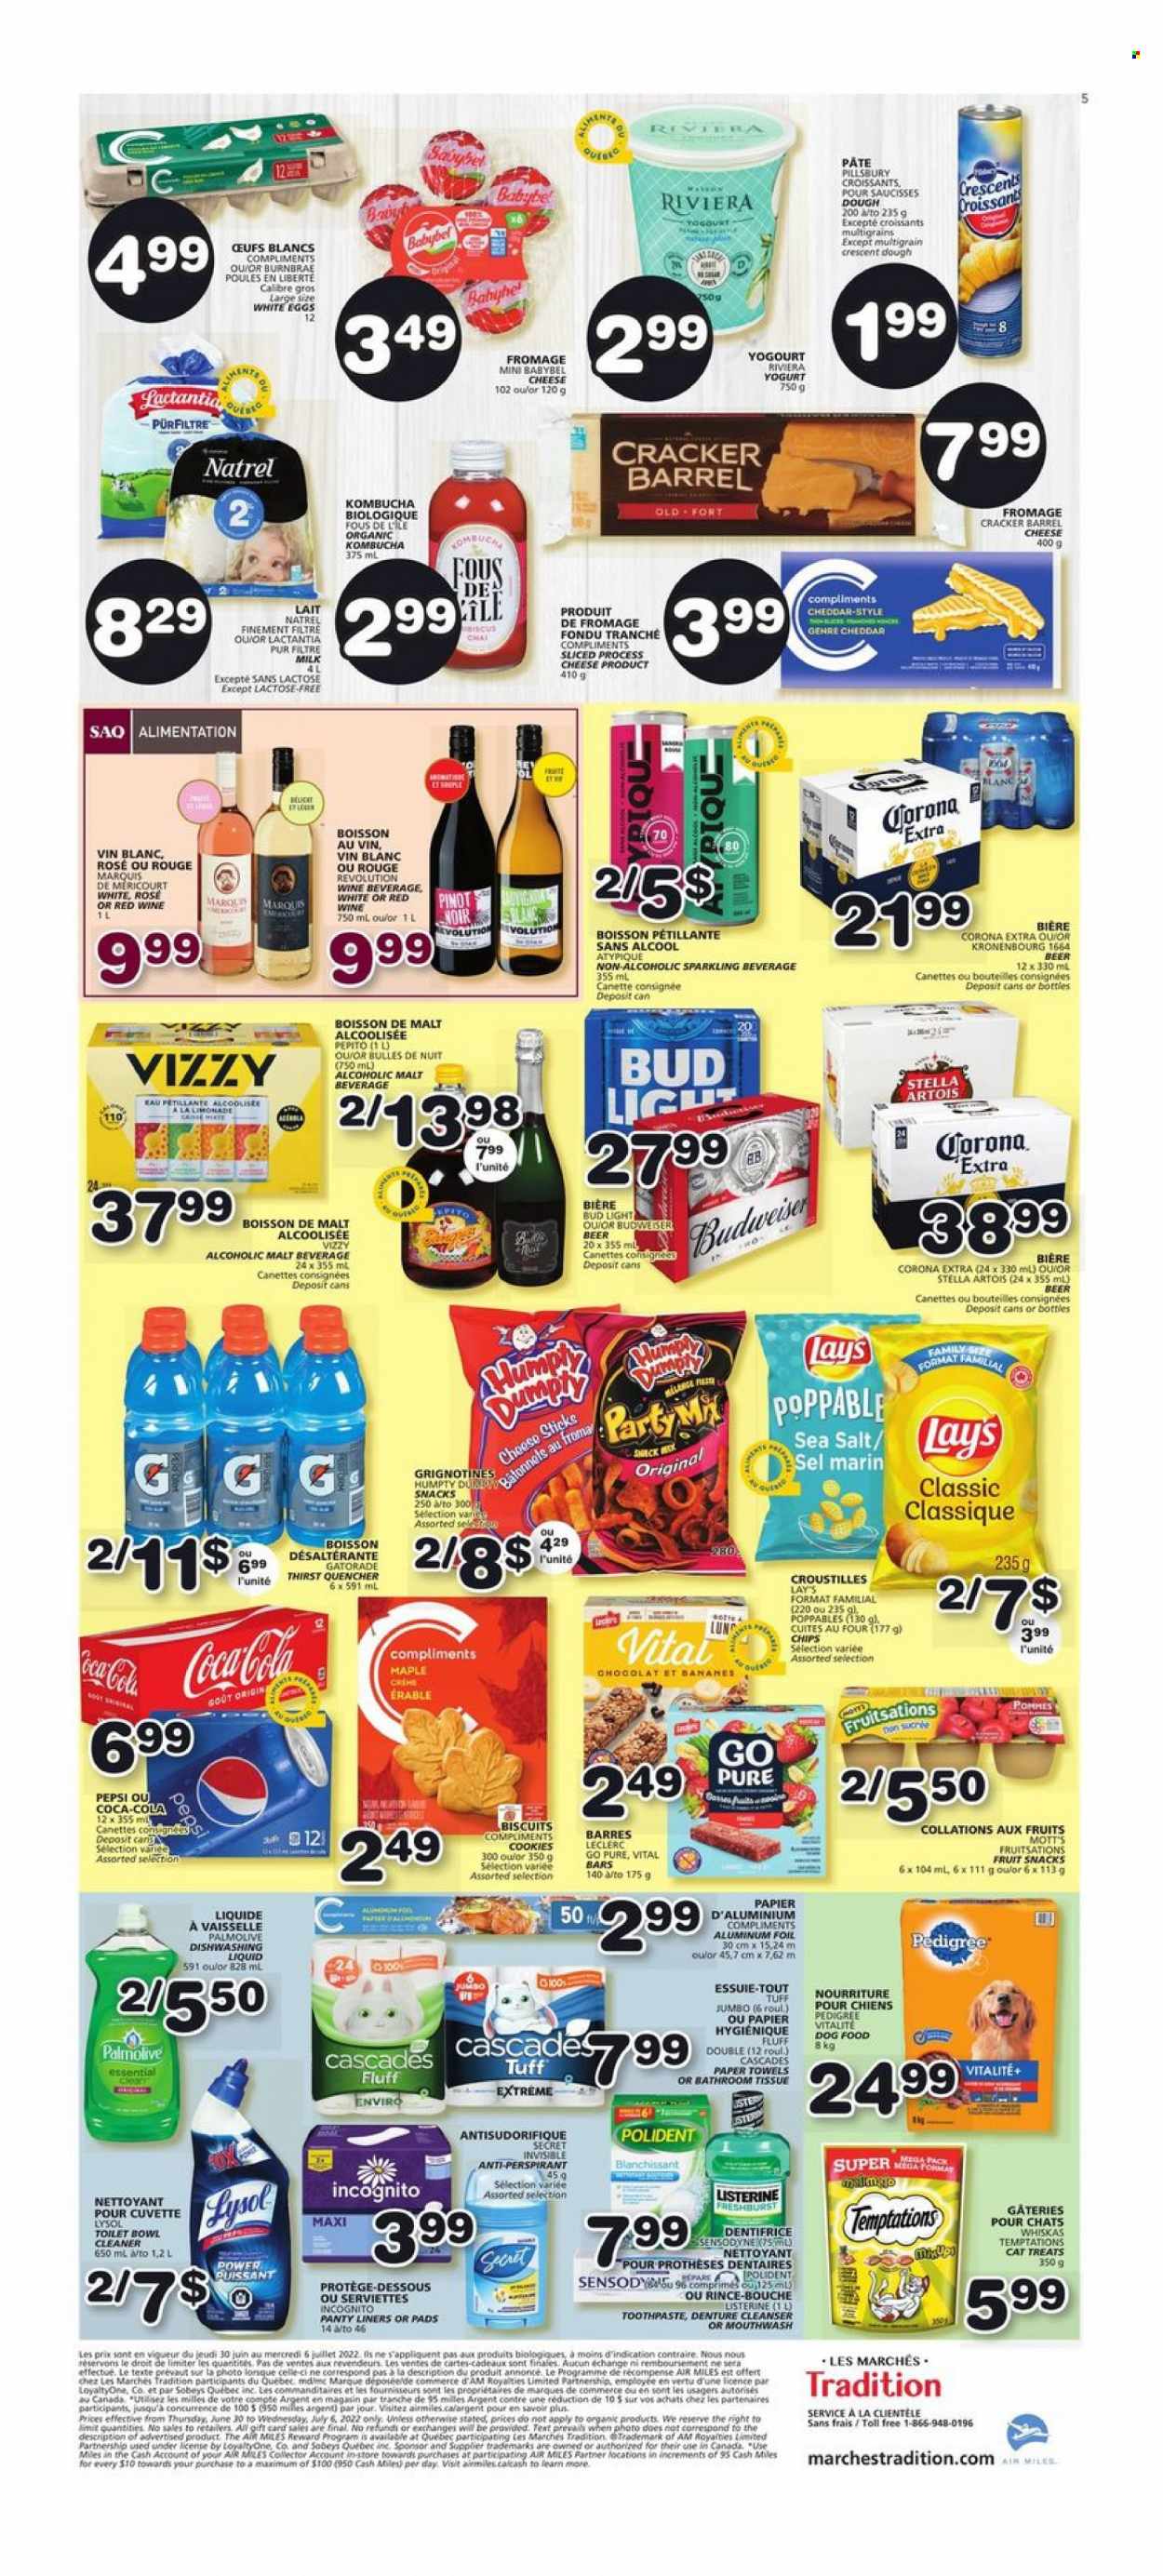 thumbnail - Les Marchés Tradition Flyer - June 30, 2022 - July 06, 2022 - Sales products - croissant, Mott's, Pillsbury, cheese, Babybel, yoghurt, milk, eggs, cookies, crackers, biscuit, fruit snack, chips, Lay’s, malt, Coca-Cola, Pepsi, Gatorade, kombucha, red wine, wine, Pinot Noir, rosé wine, beer, Bud Light, Corona Extra, bath tissue, kitchen towels, paper towels, cleaner, Lysol, Cascade, dishwashing liquid, Palmolive, toothpaste, mouthwash, Polident, cleanser, anti-perspirant, animal food, dog food, Pedigree, Budweiser, Listerine, Stella Artois, Whiskas. Page 5.